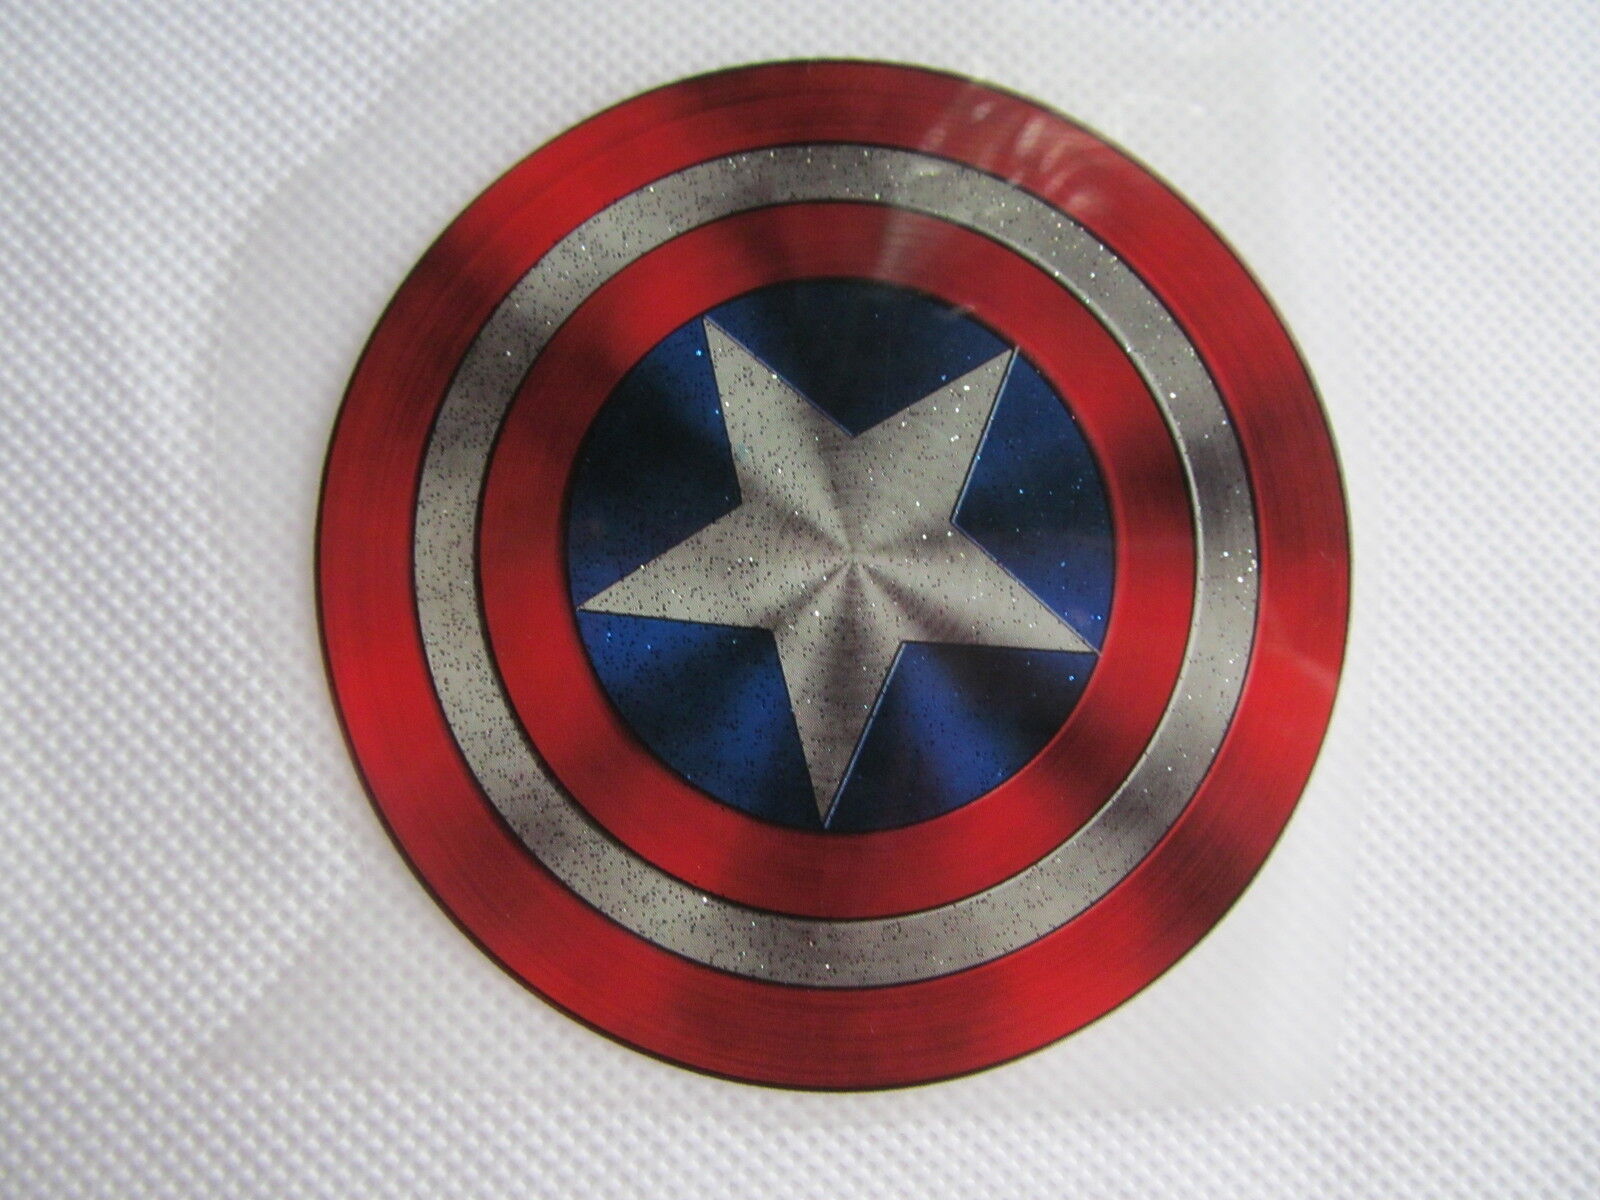 MARVEL CAPTAIN AMERICA SHIELD IRON ON SMOOTH HEAT TRANSFER PATCH CLOTHES BAGS